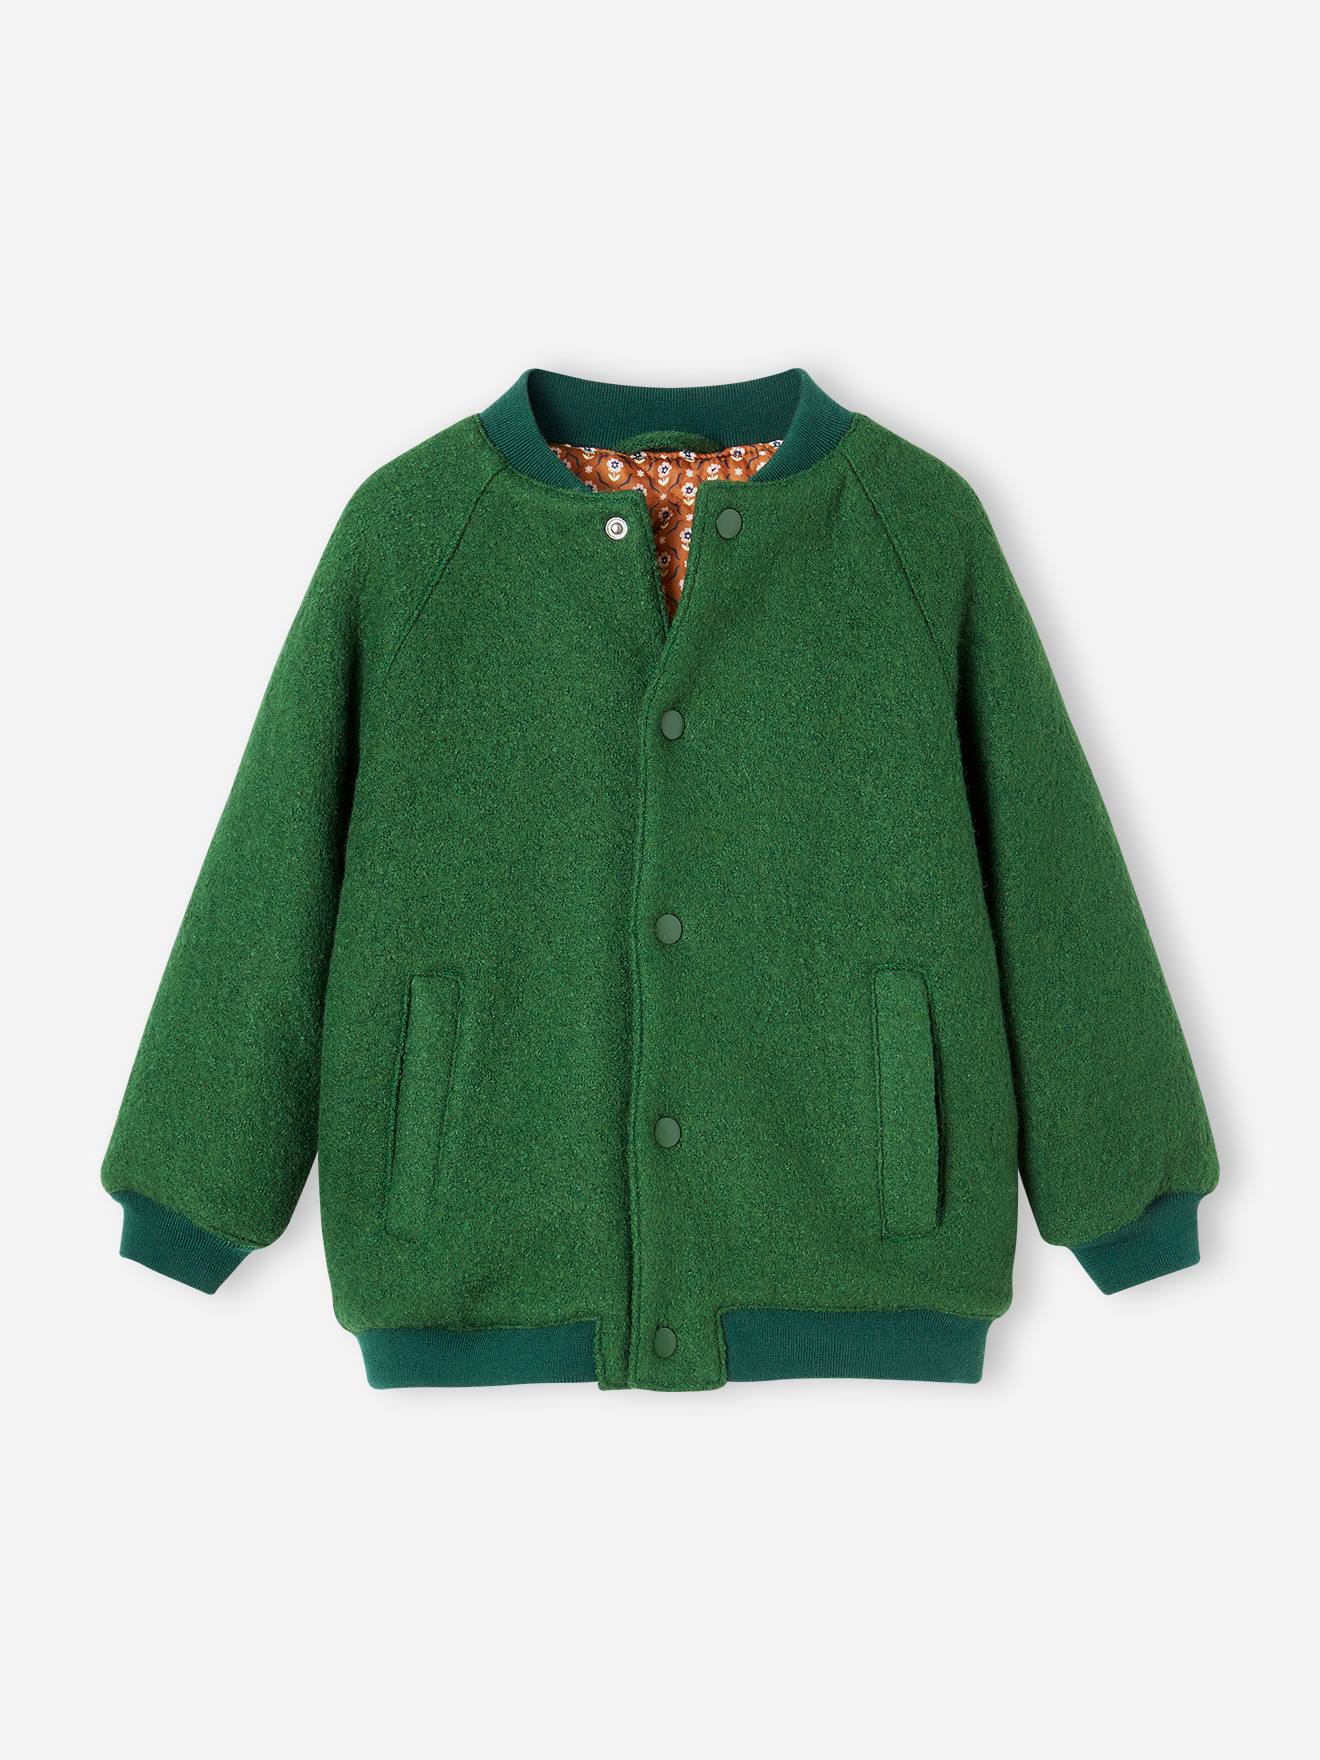 Teddy-Style Jacket in Boucle Wool for Girls english green